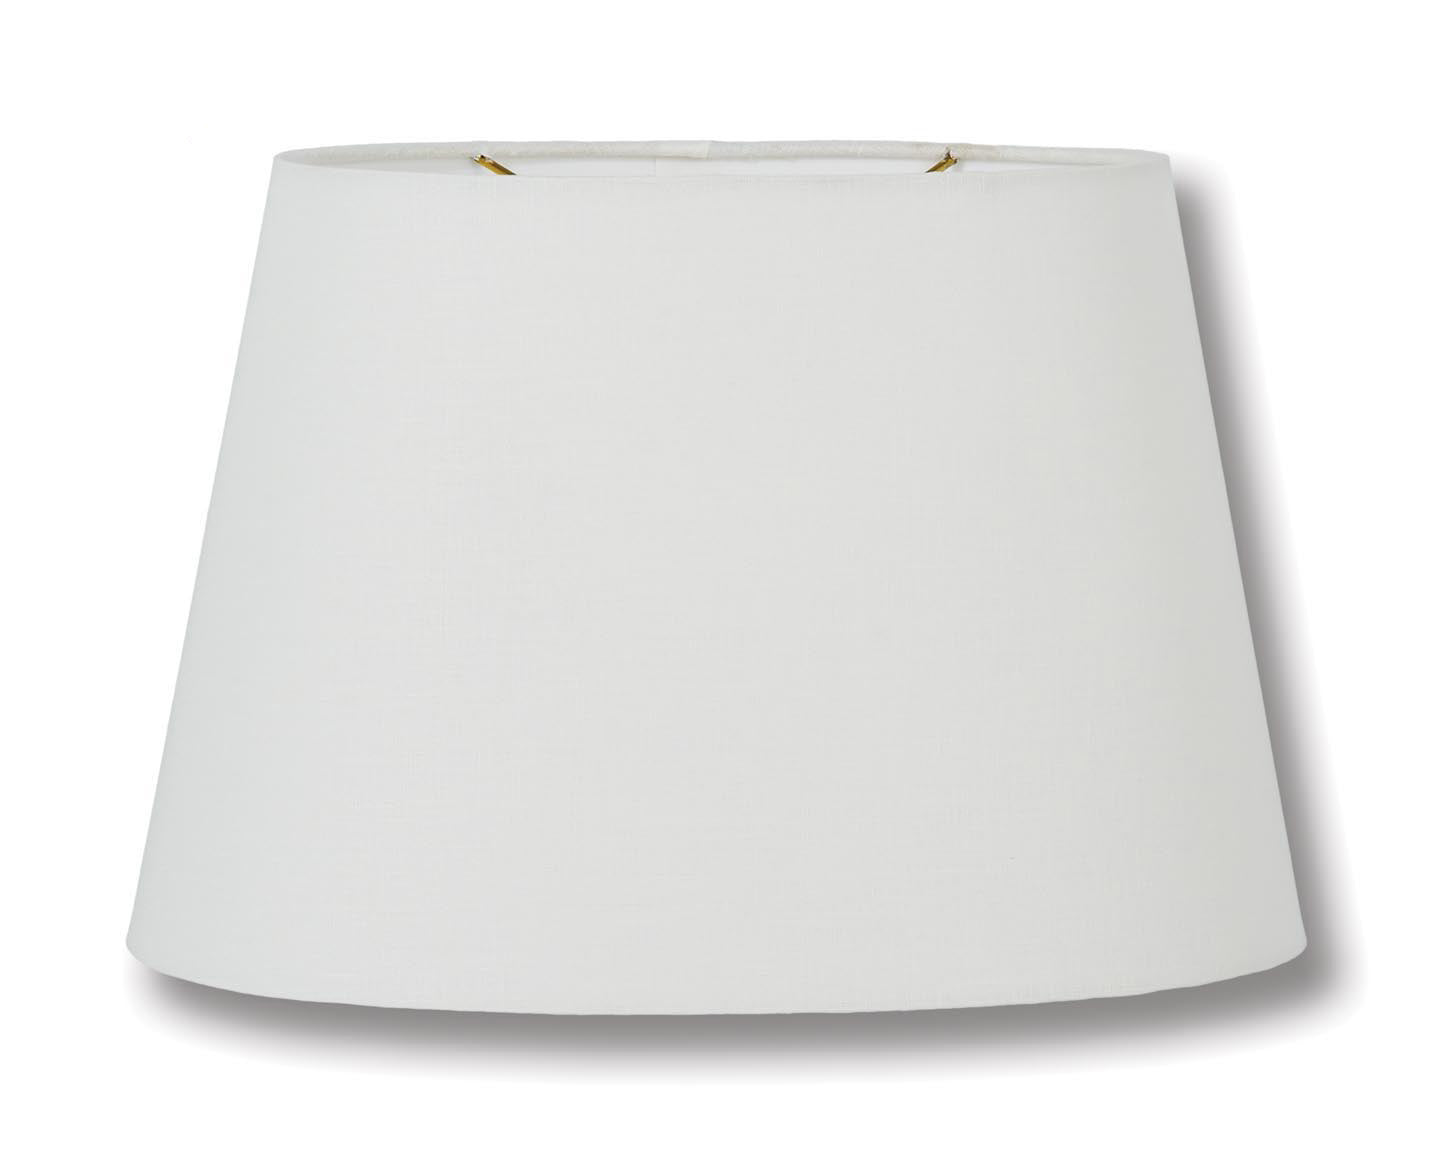 Oval Hardback Lamp Shades - Off White Color, 100% Fine Linen Material